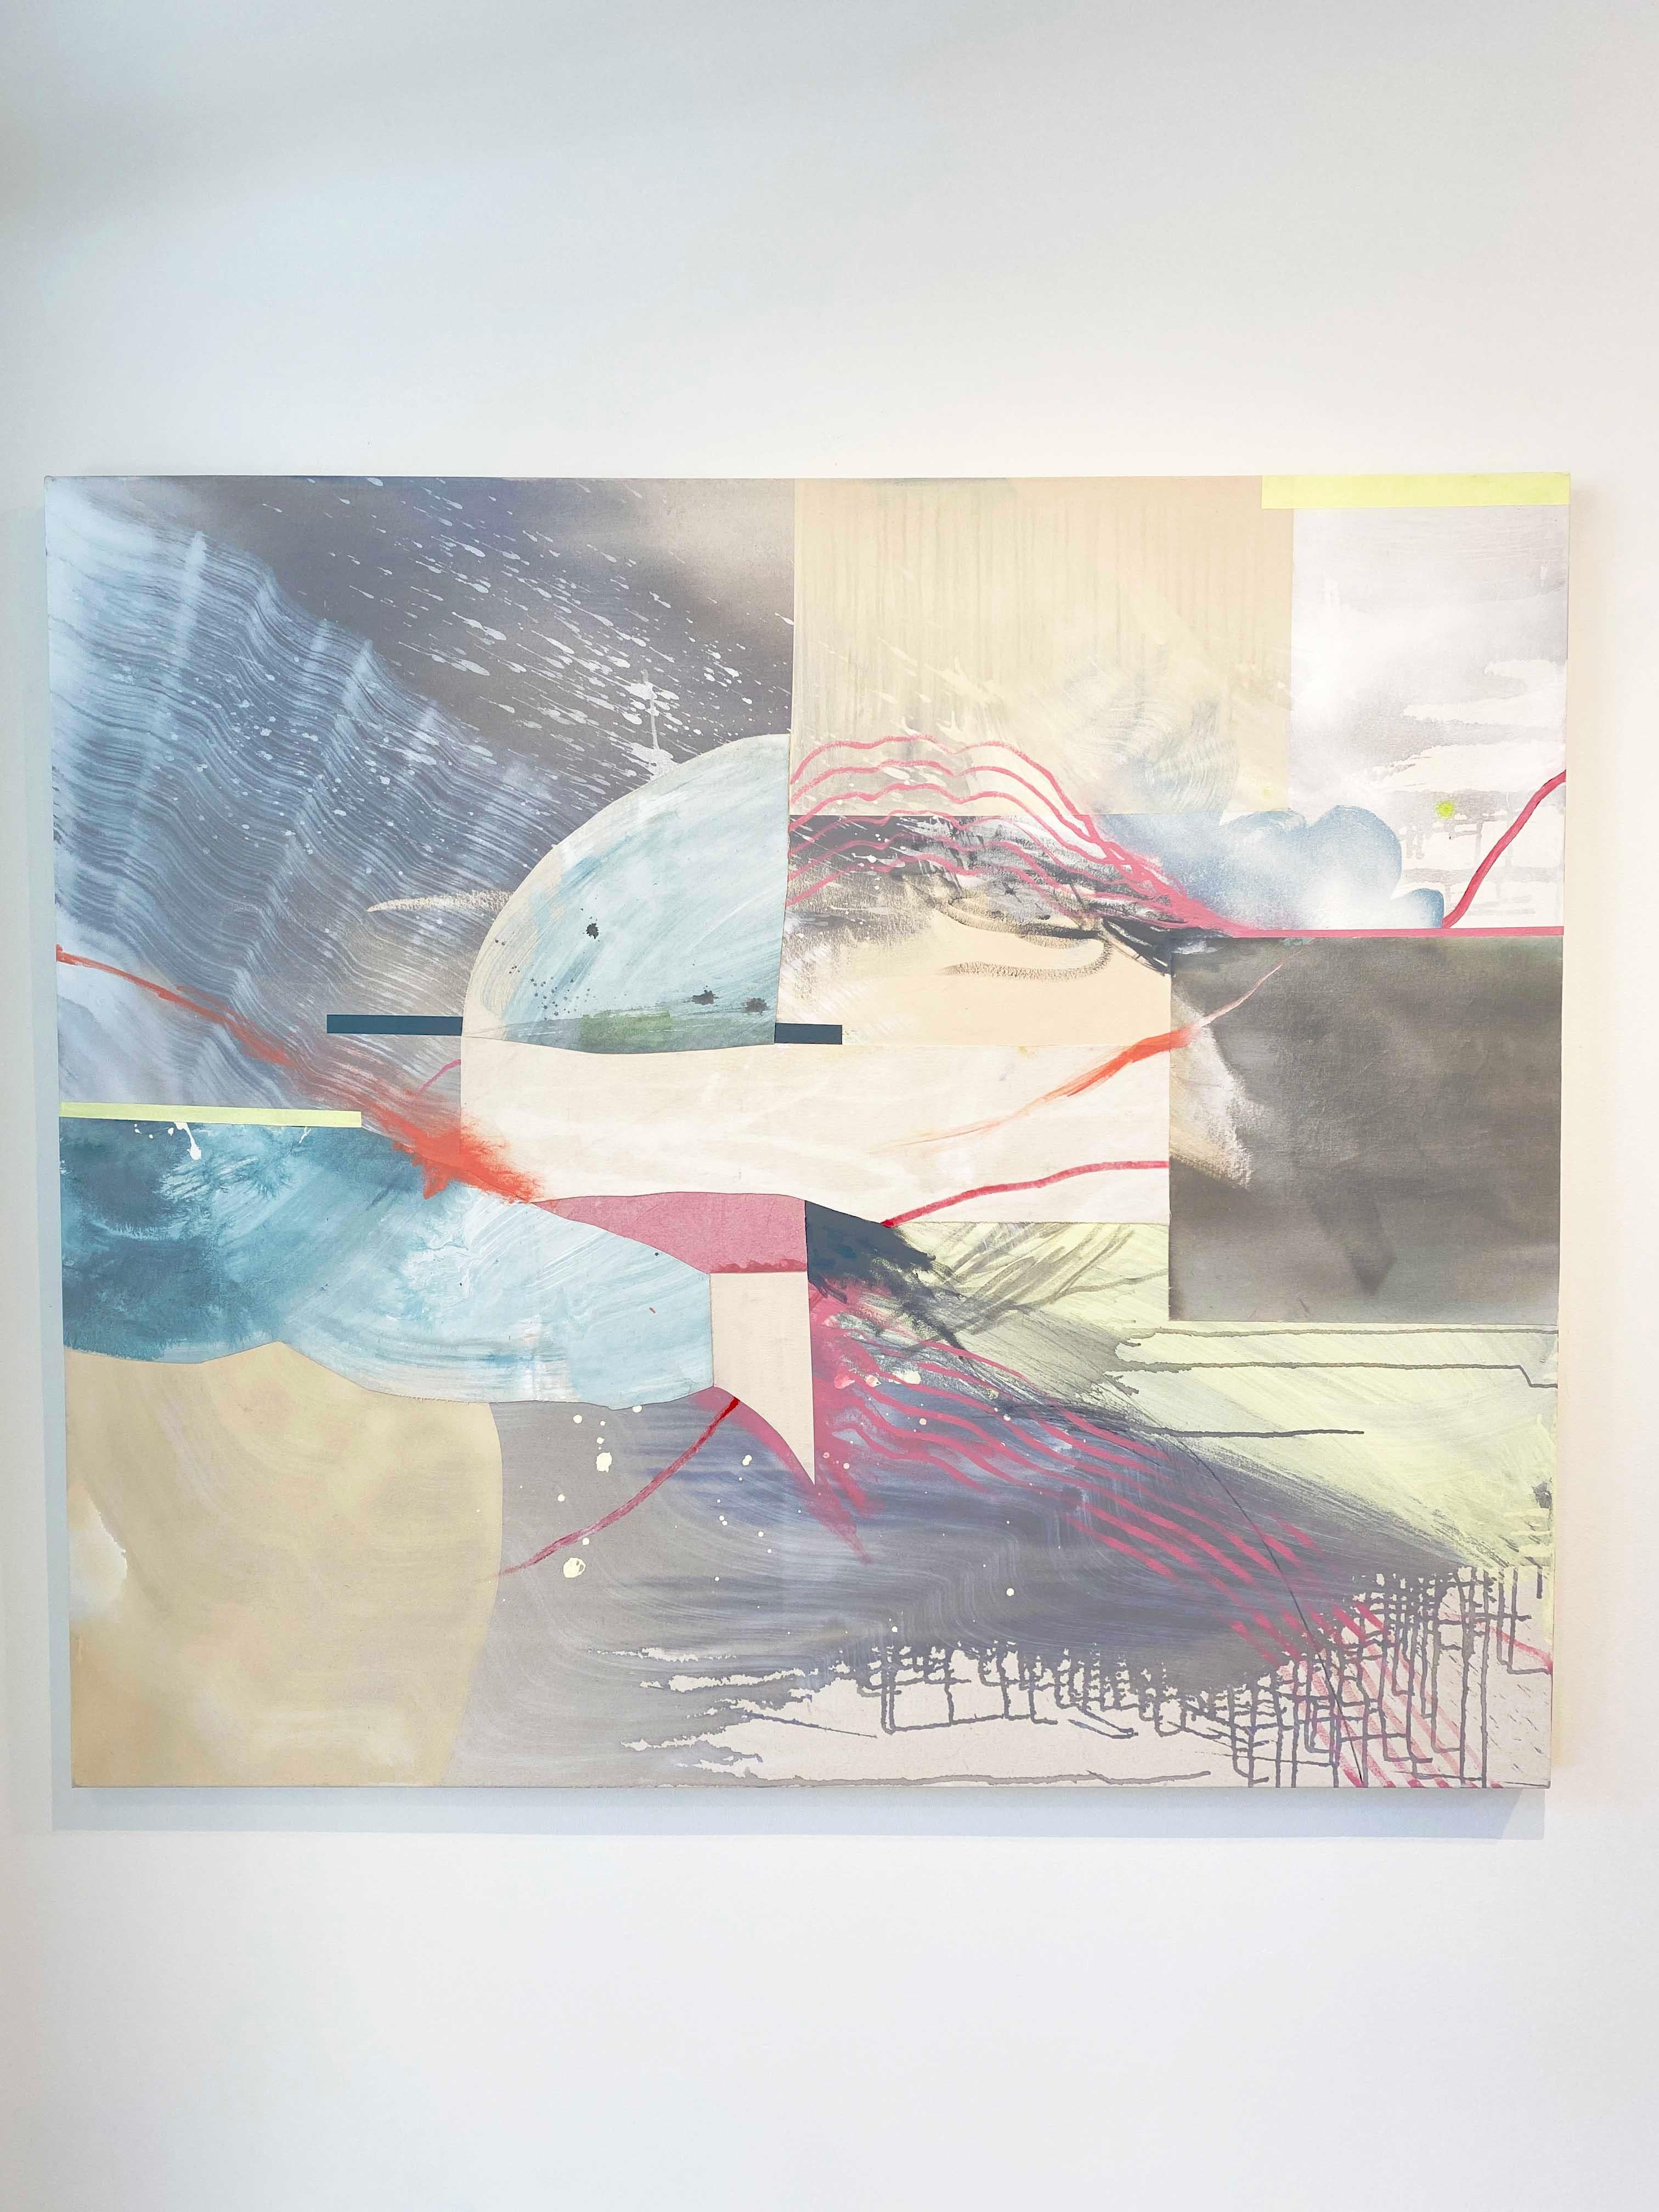 'Cyclical Summons' 2021 by Contemporary American artist, Rebecca Stern. Acrylic, ink, spray paint, embroidery, and fabric on canvas, 56 x 64 in. This painting incorporates mostly a soft palette of colors in blue, pink, orange, green, beige, white,